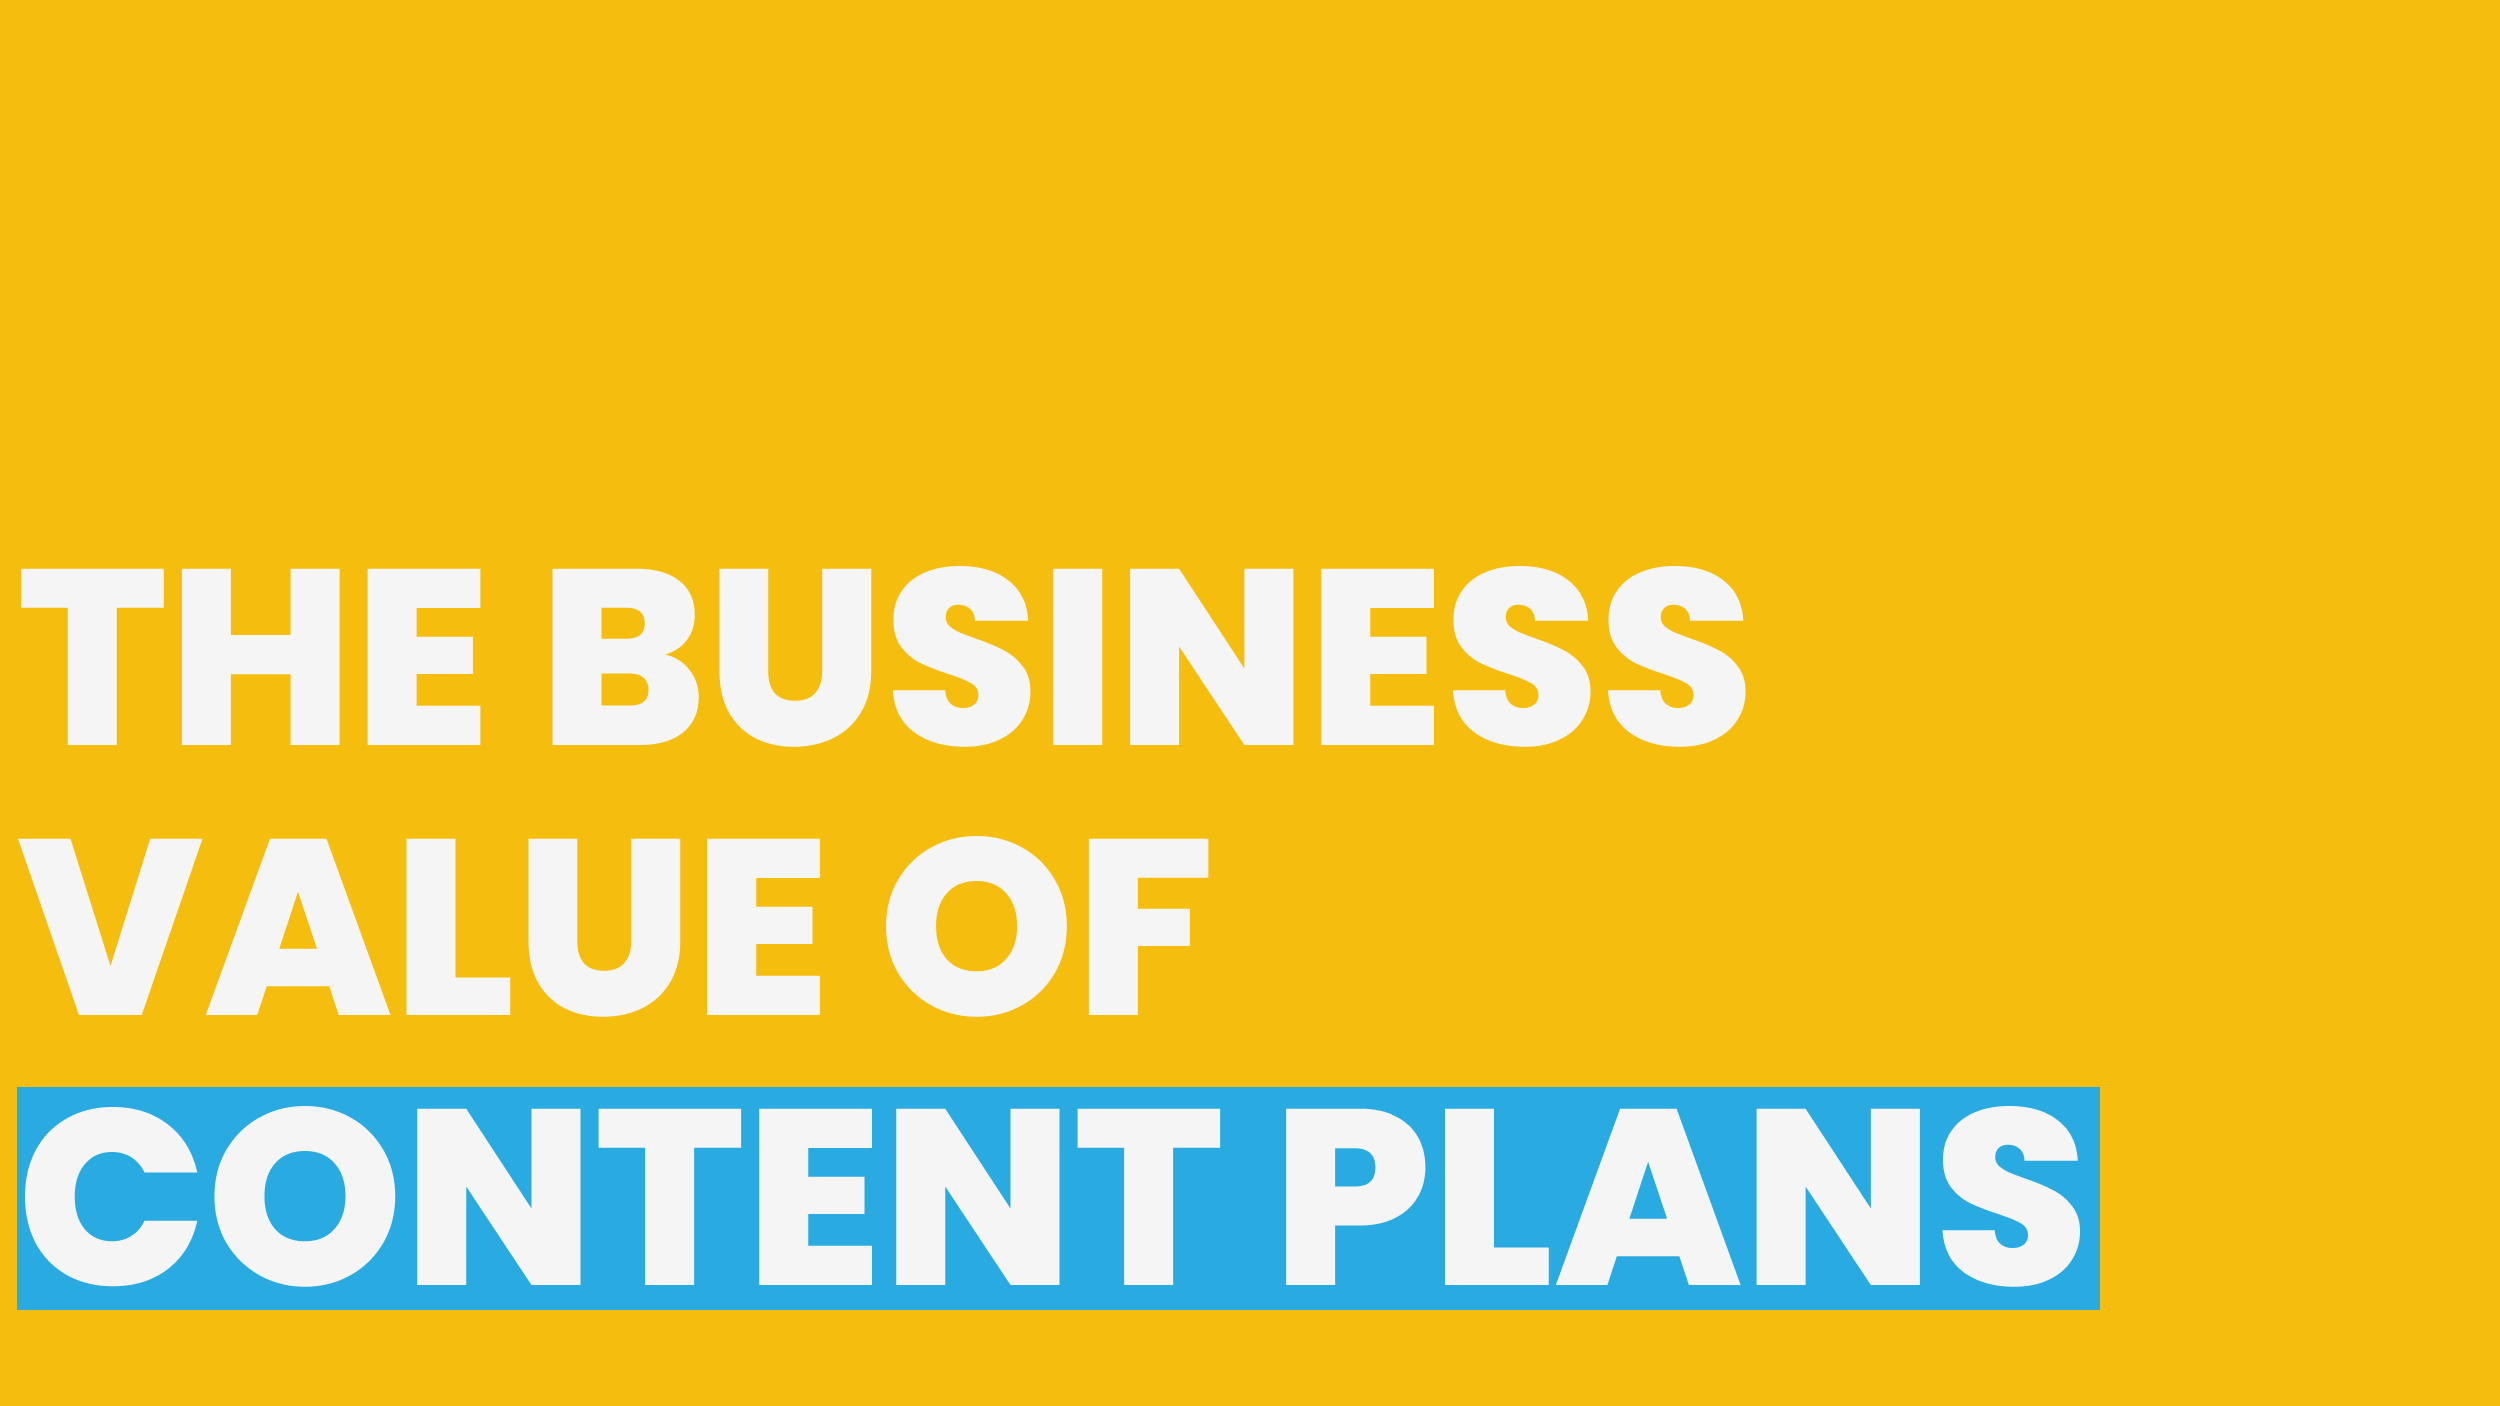 The importance of content planning for business success